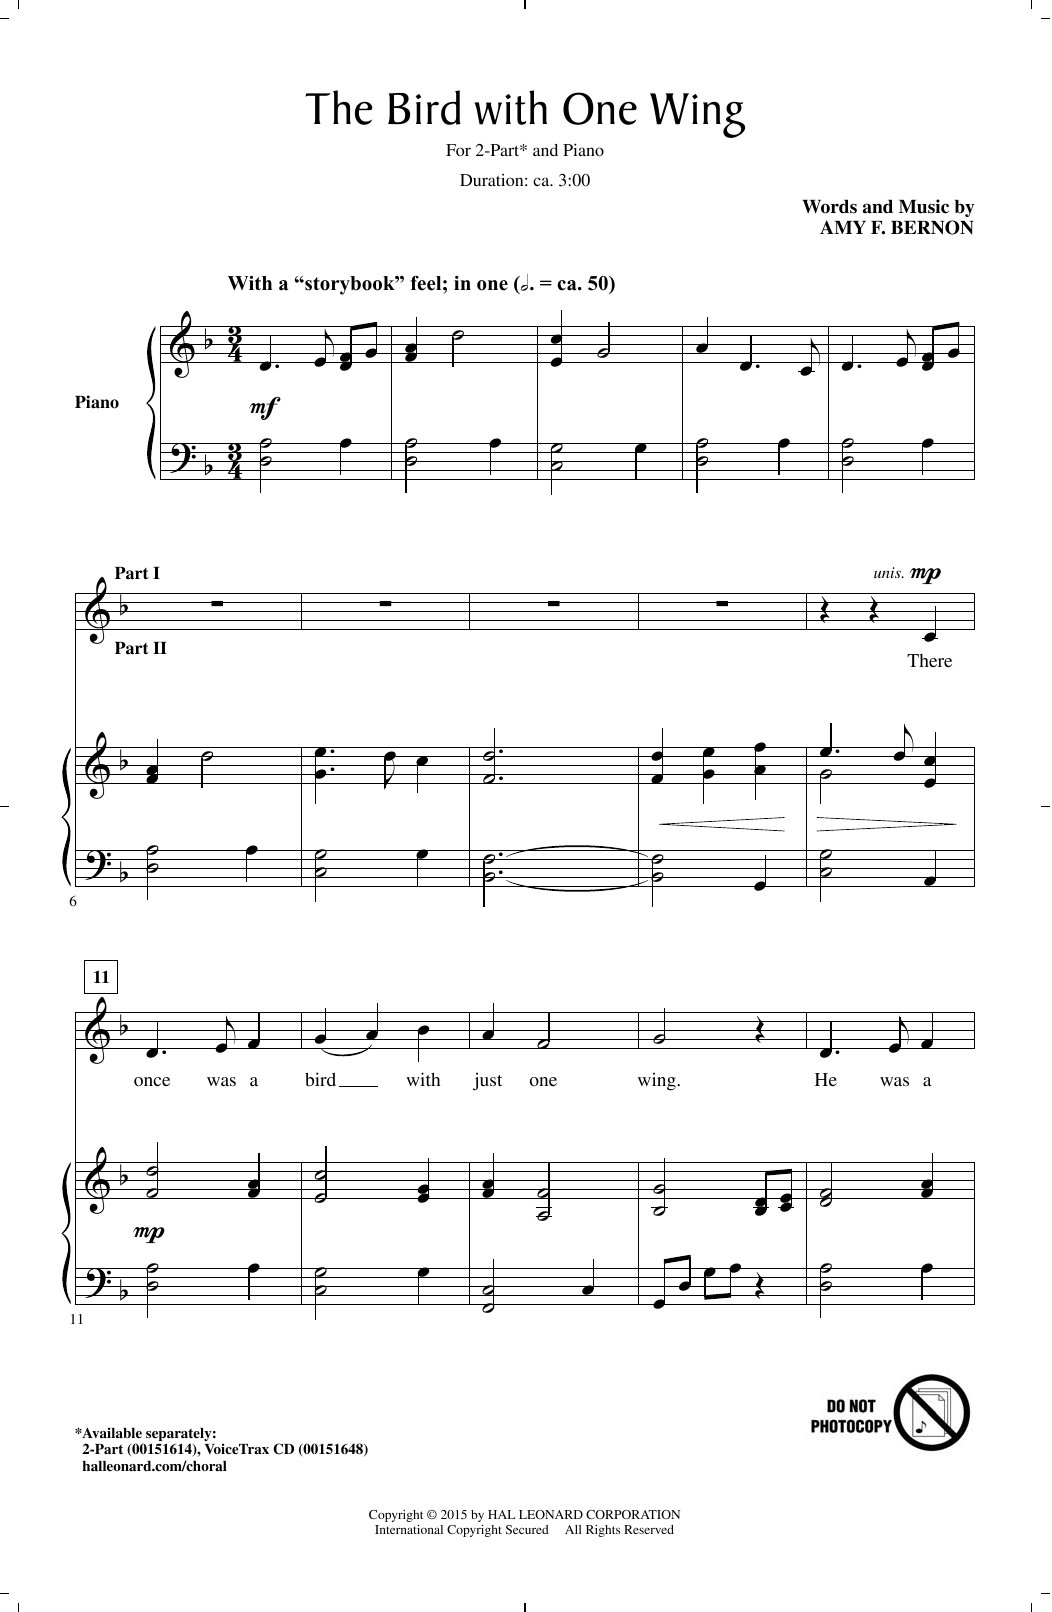 Amy Bernon The Bird With One Wing sheet music notes and chords. Download Printable PDF.